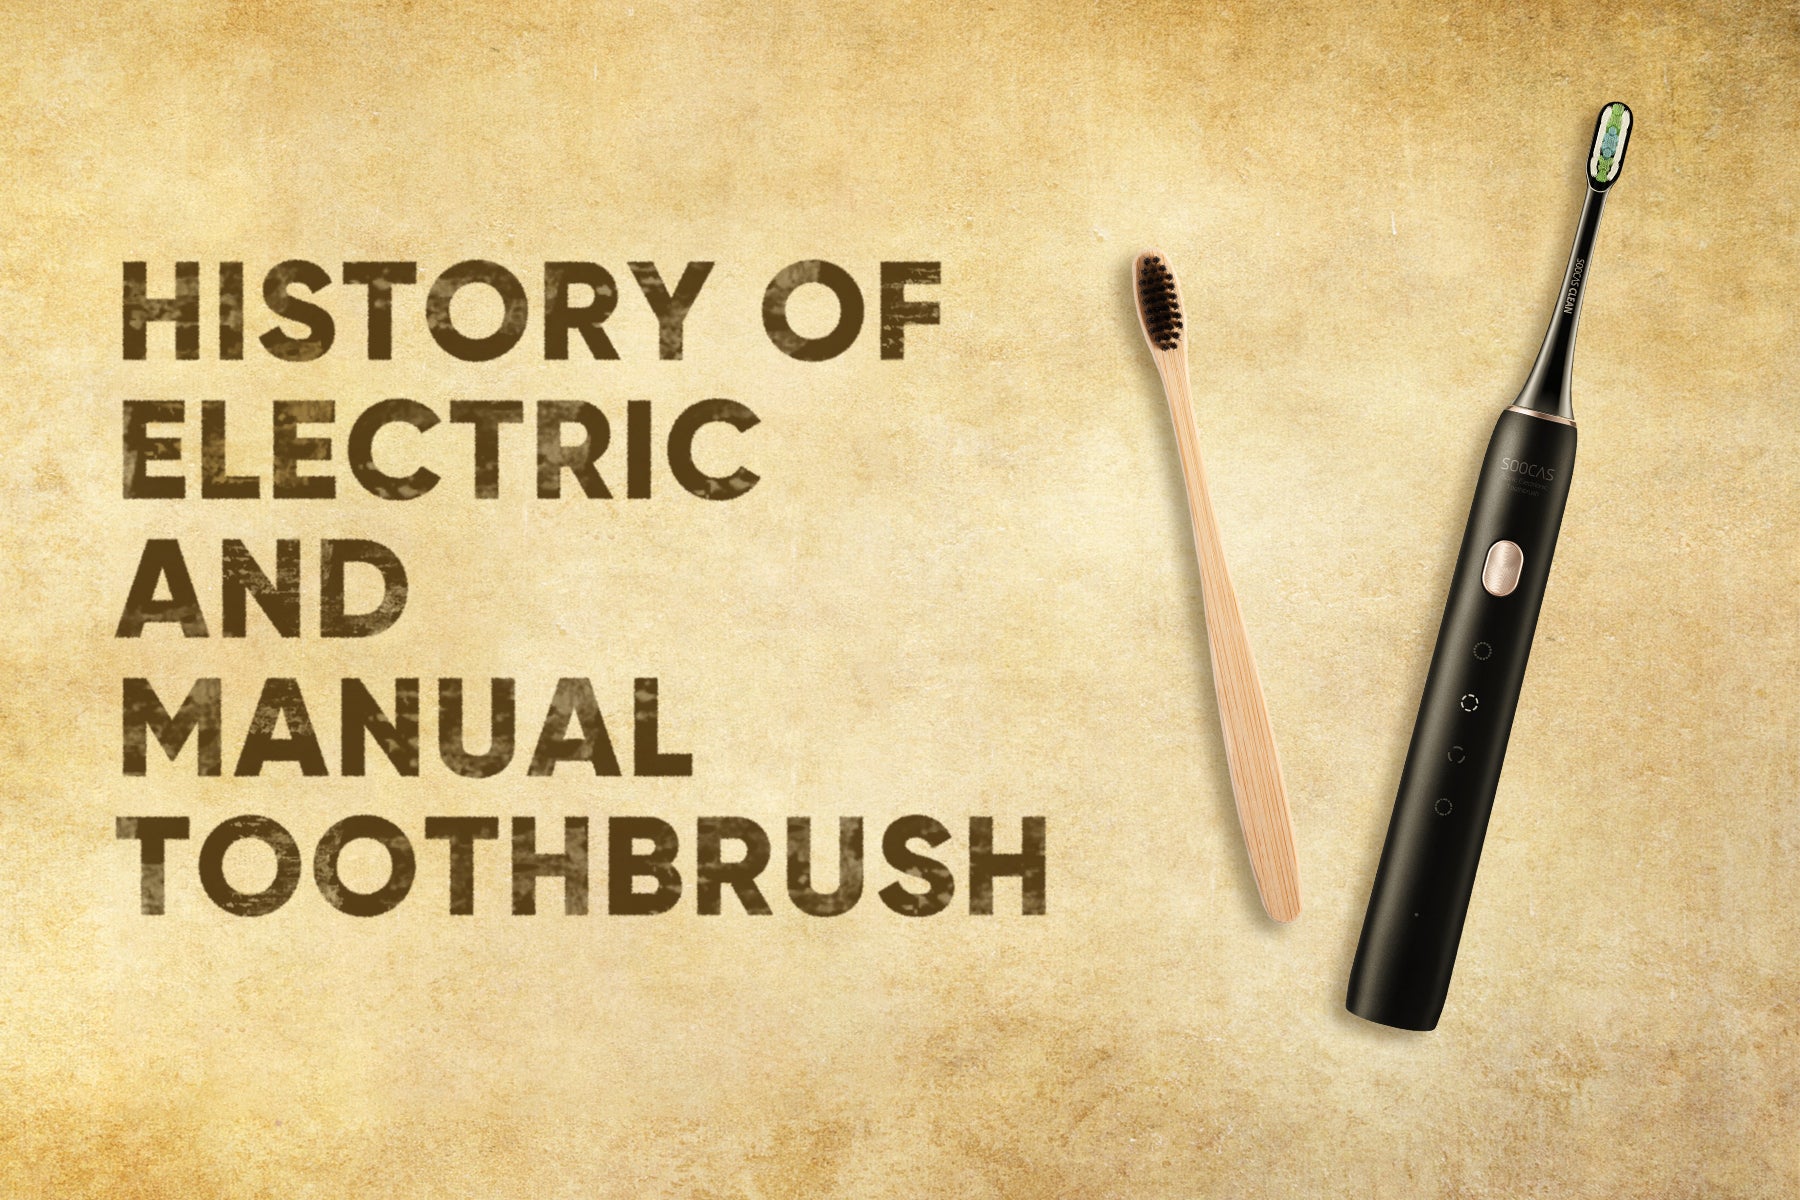 History of electric and manual toothbrushes